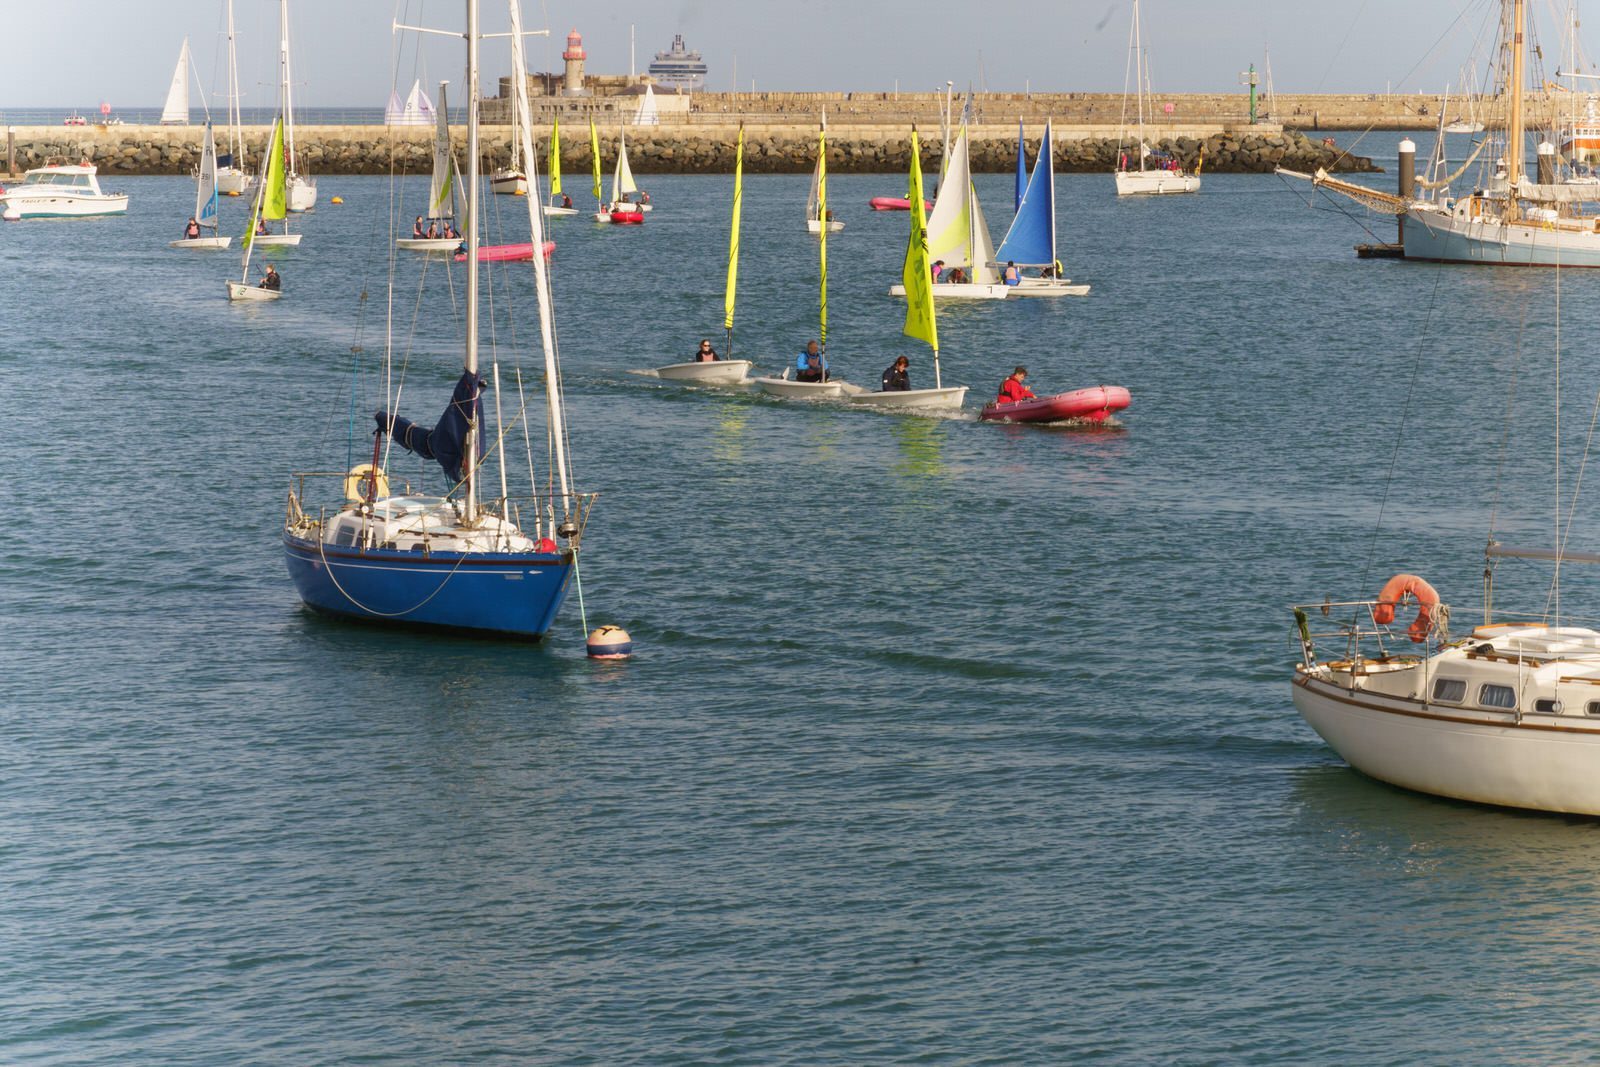 learning to sail, west pier, Dun Laoghaire,Irish National Sailing & Powerboat School,scenic venue,many amenities,Ireland, William Murphy, Sony, A7RIV, 70-20mm lens, 001